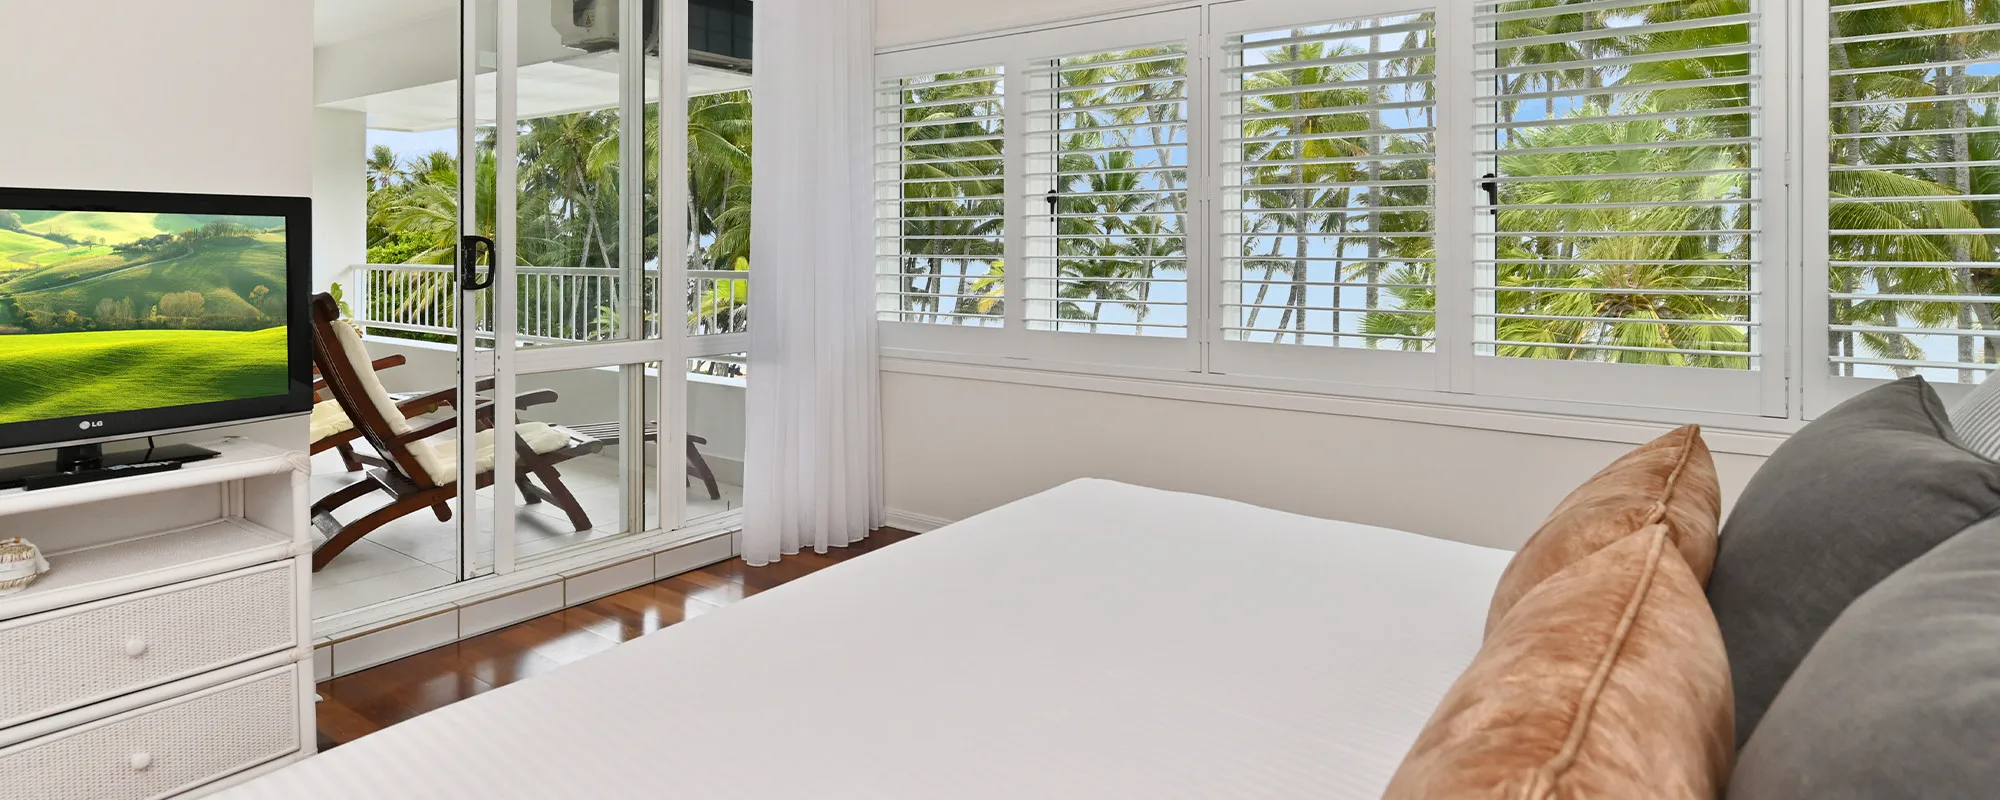 Alamanda Palm Cove by Lancemore Boutique Luxury Accommodation Four Bedroom Apartment 2000 x 800 11 v2